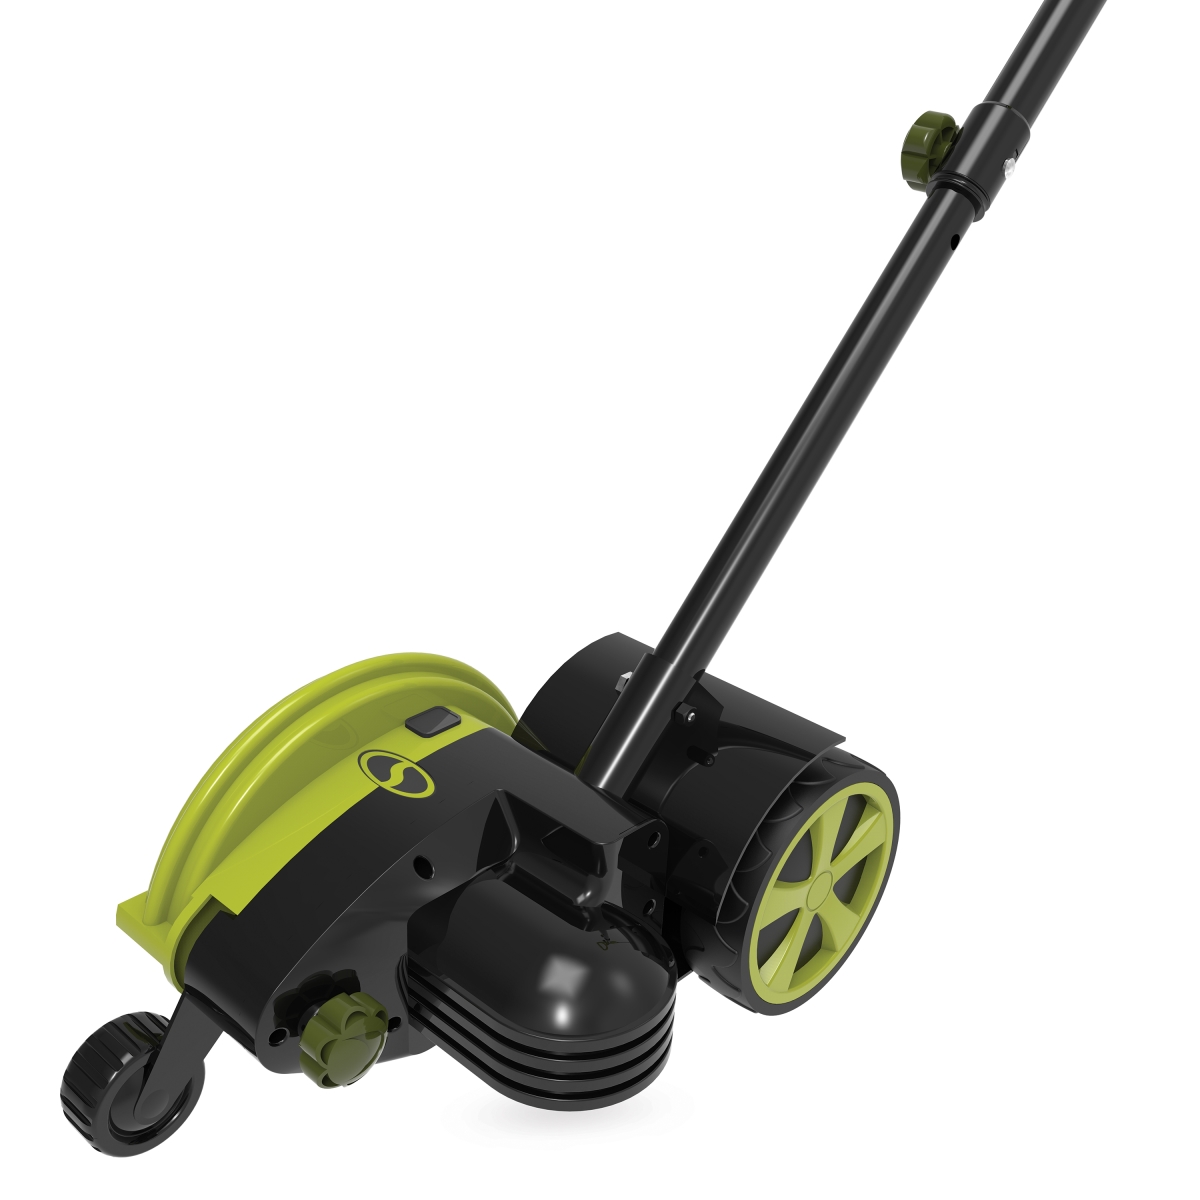 Sjedge7 12a Electric Wheeled Landscape 2-in-1 Edger Plus Trencher